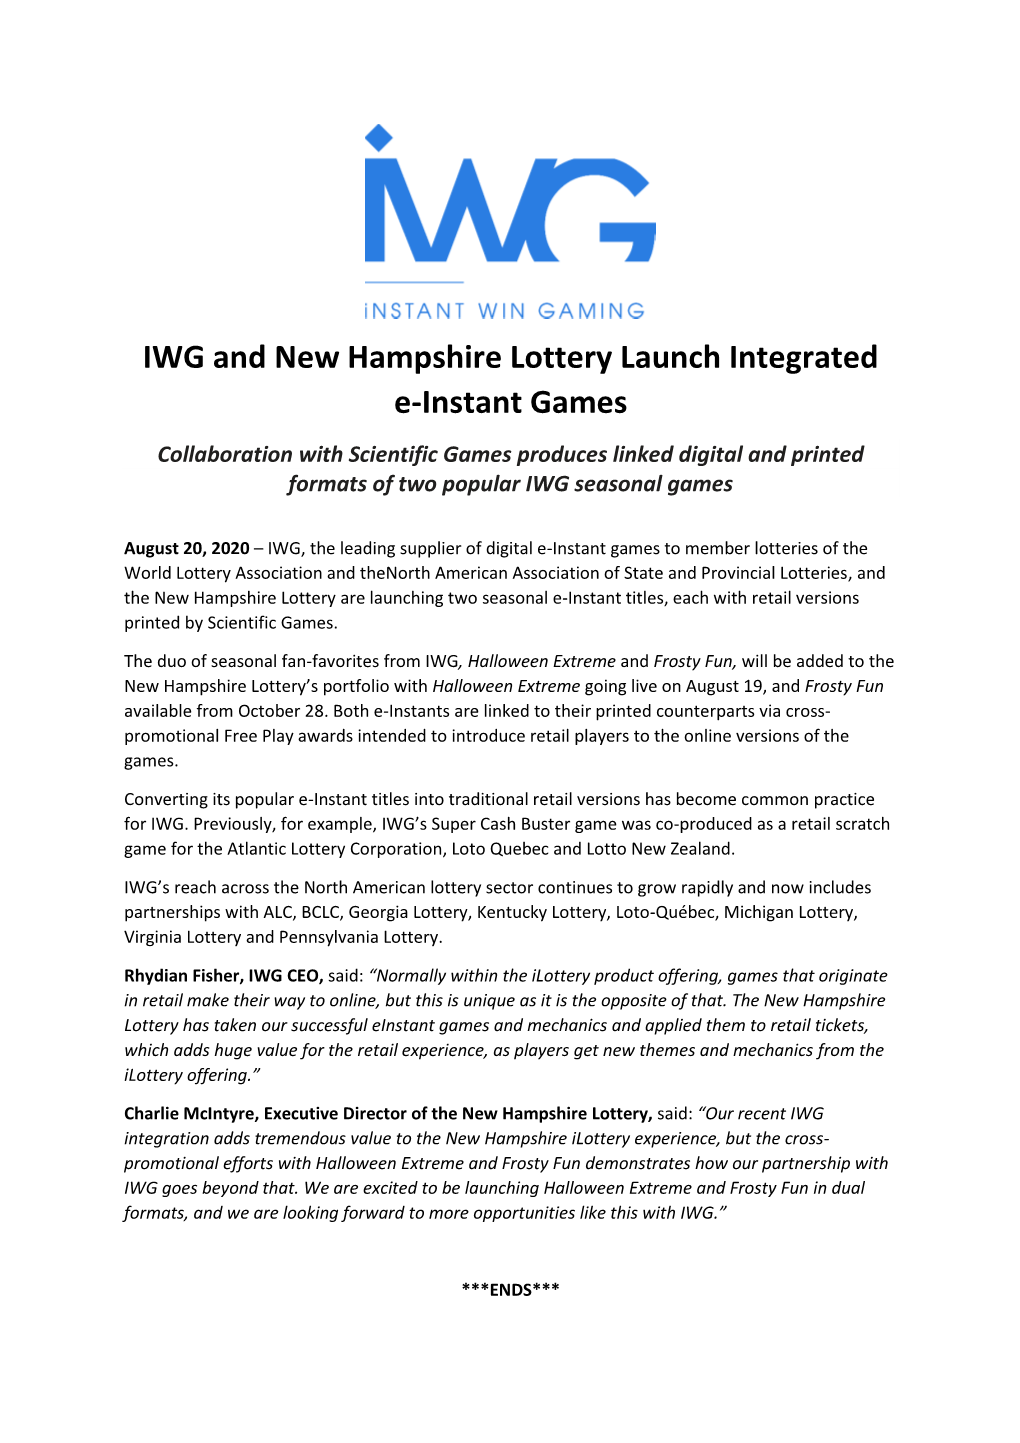 IWG and New Hampshire Lottery Launch Integrated E-Instant Games